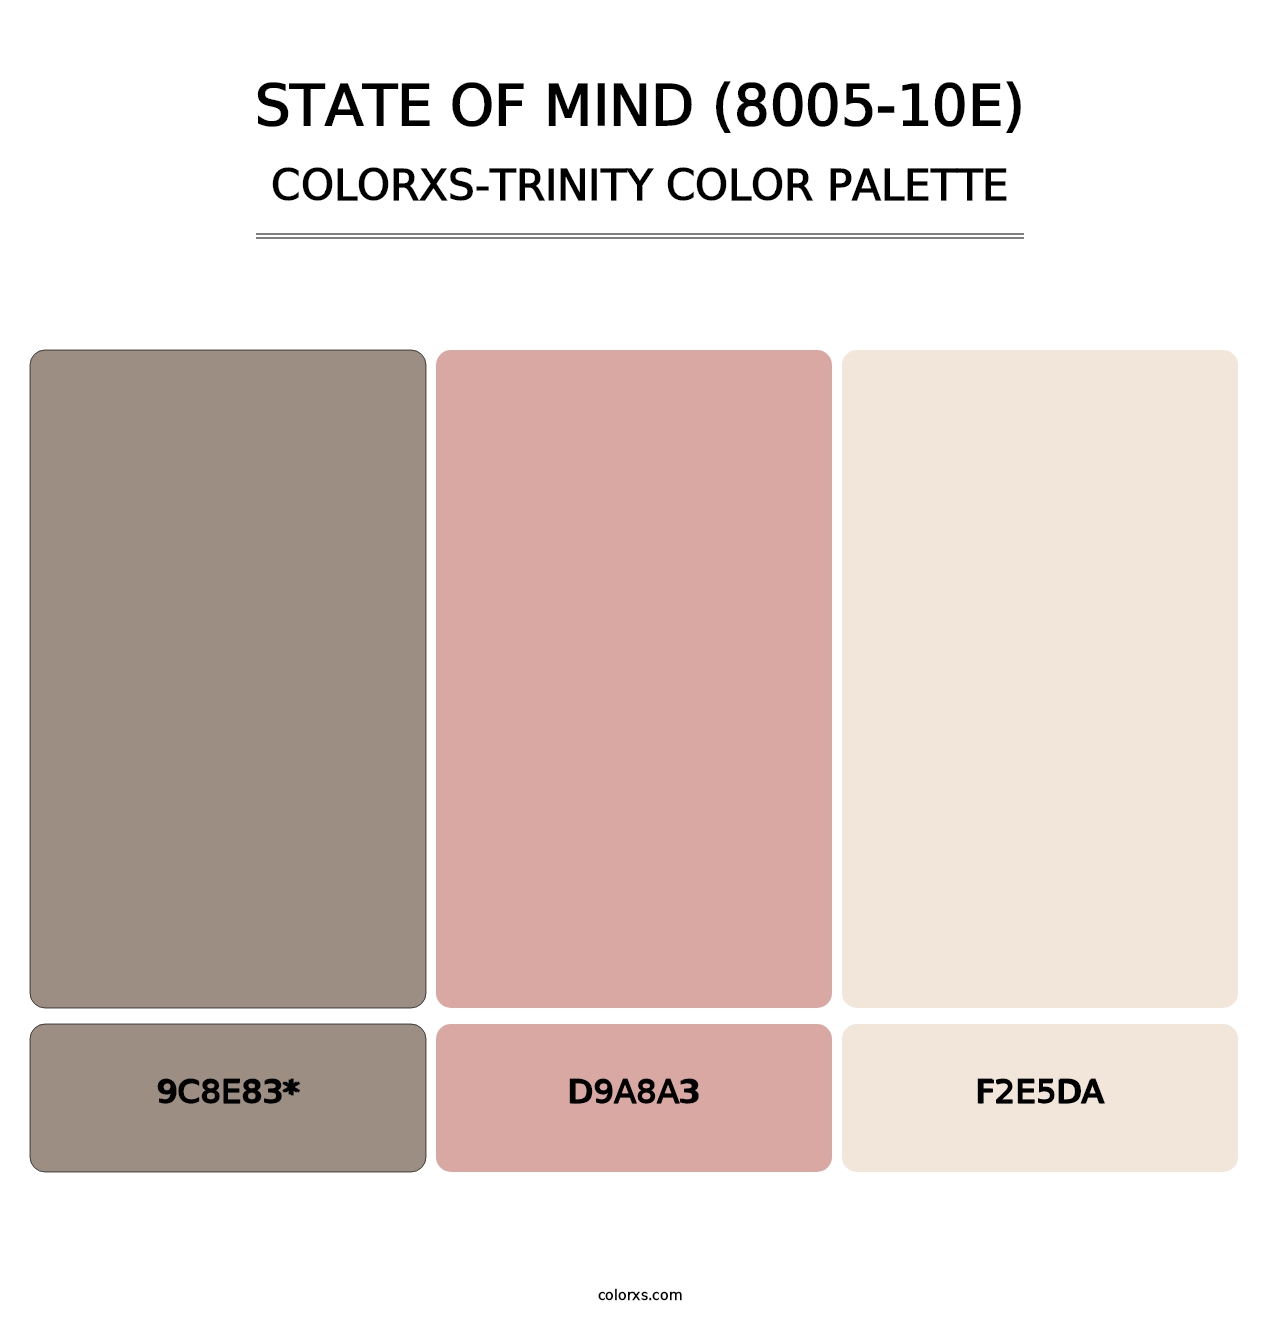 State of Mind (8005-10E) - Colorxs Trinity Palette